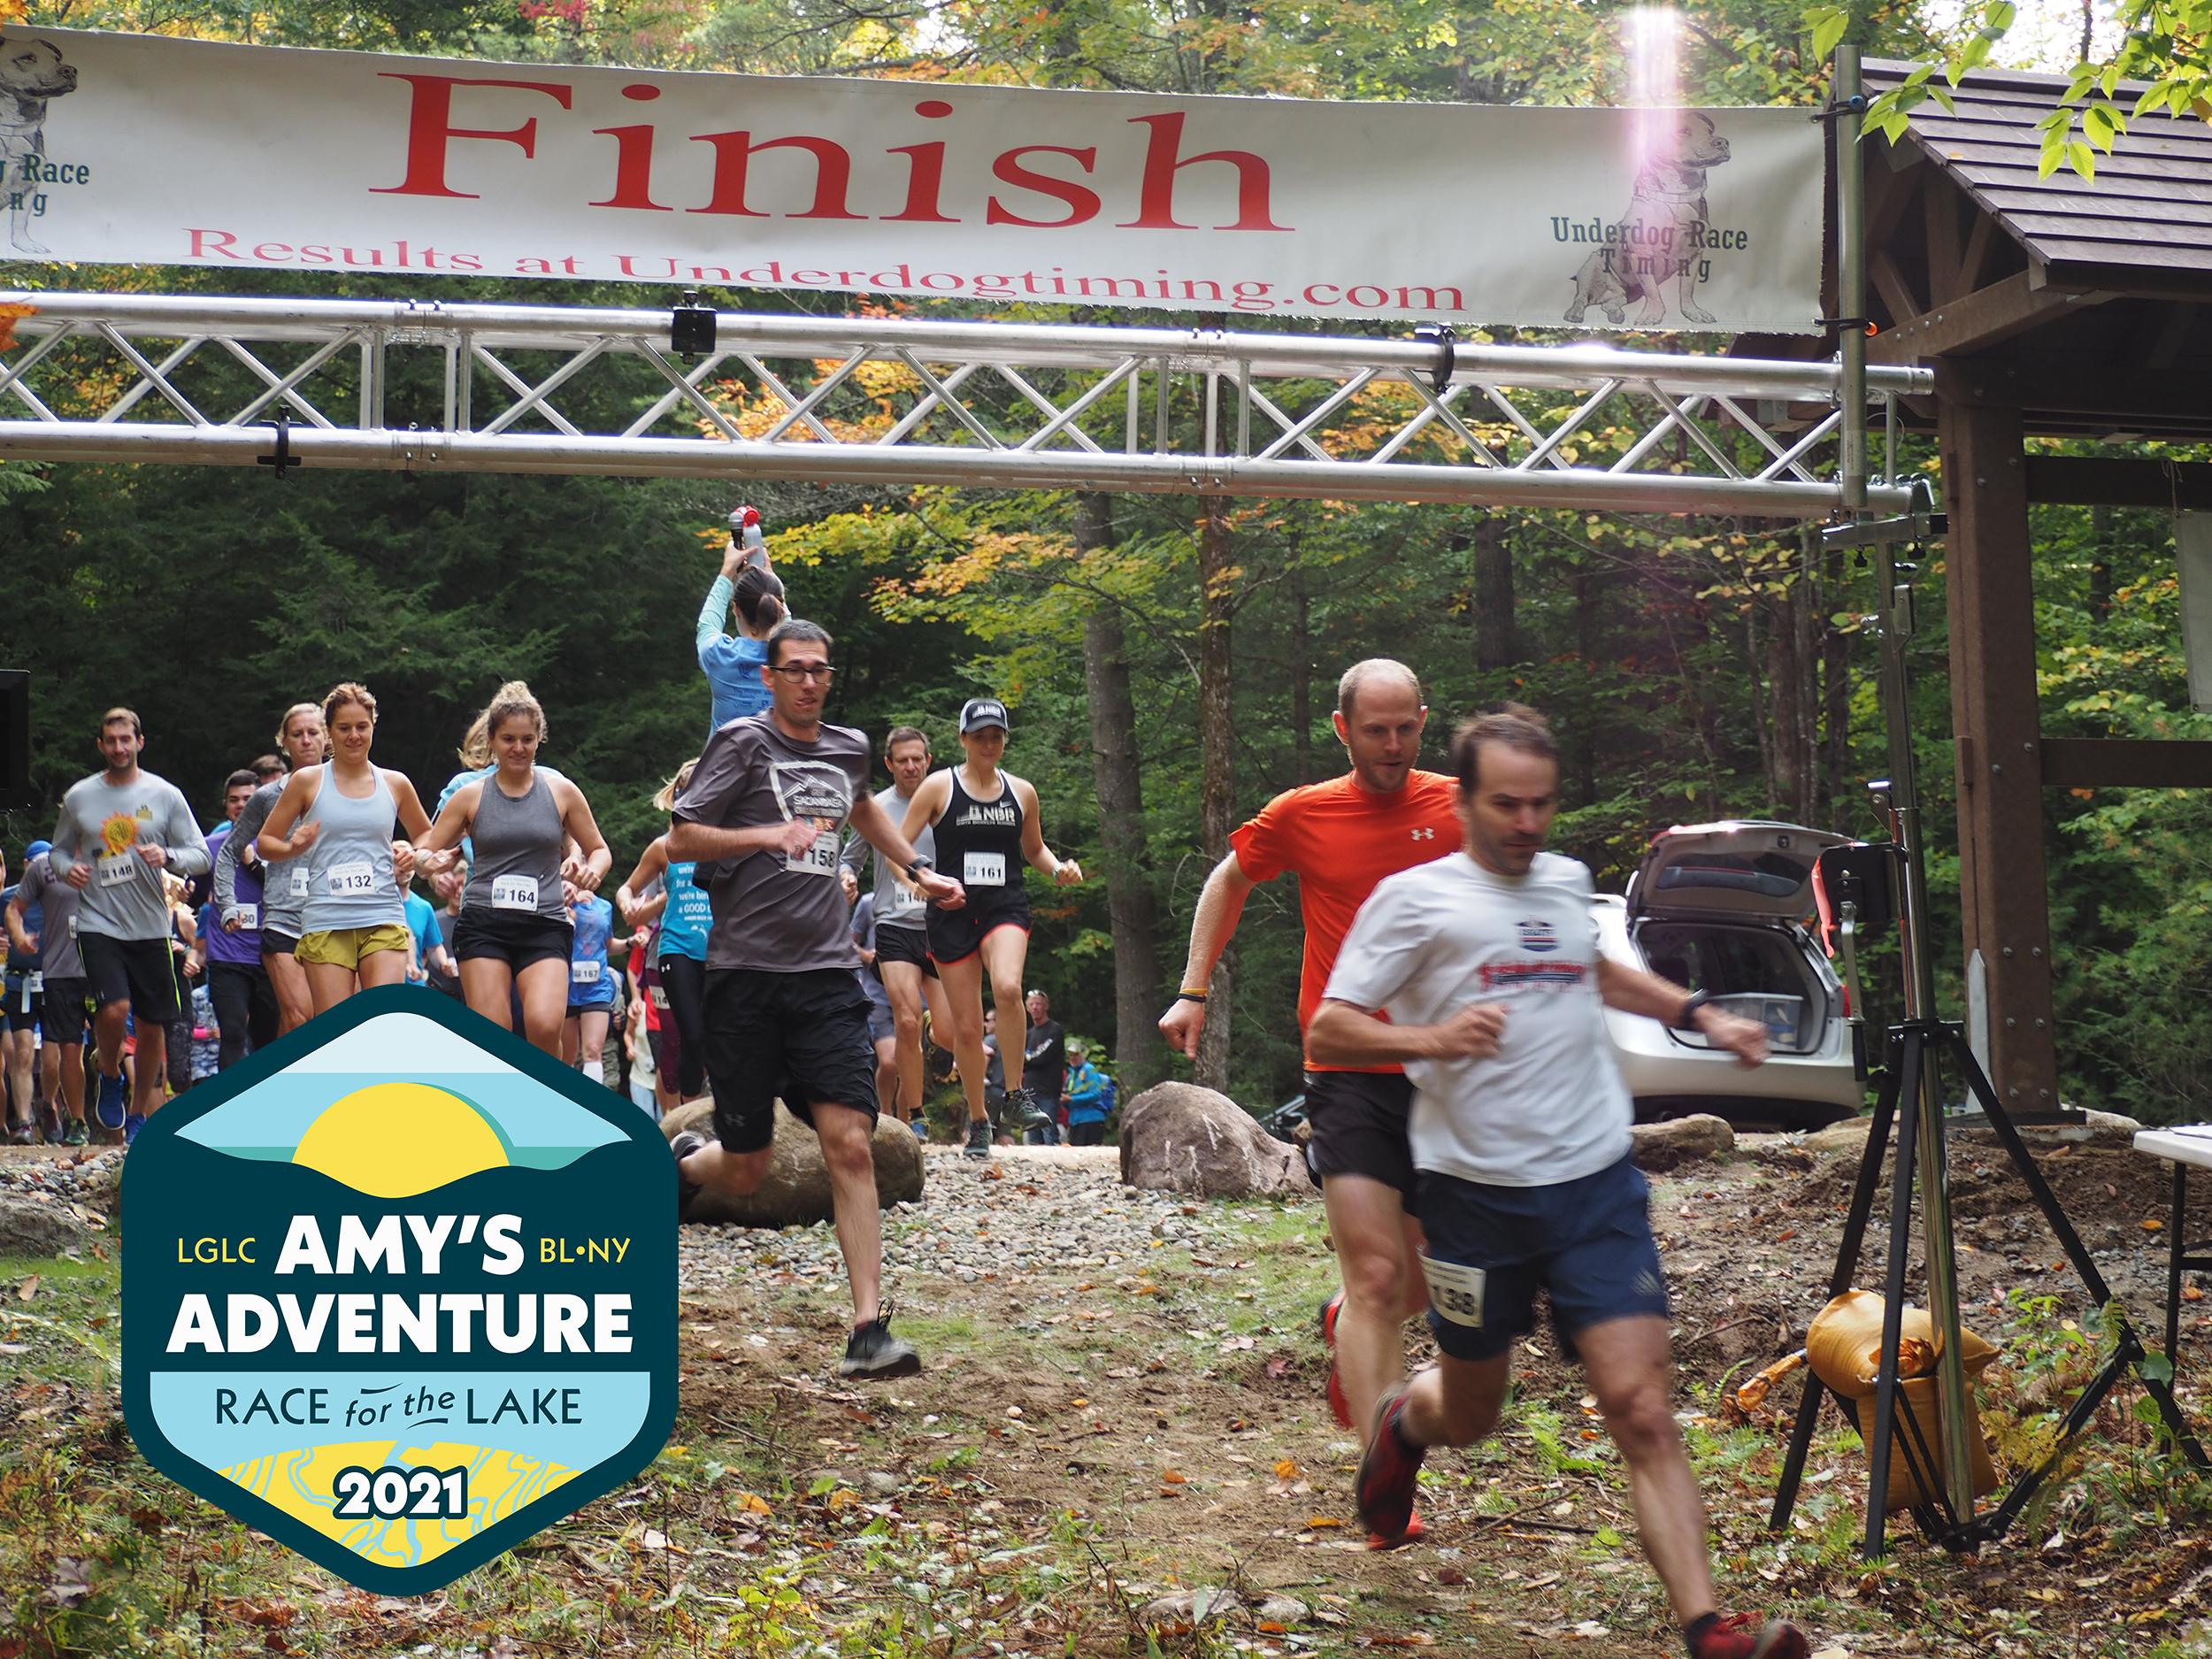 Register for Amy's Race!